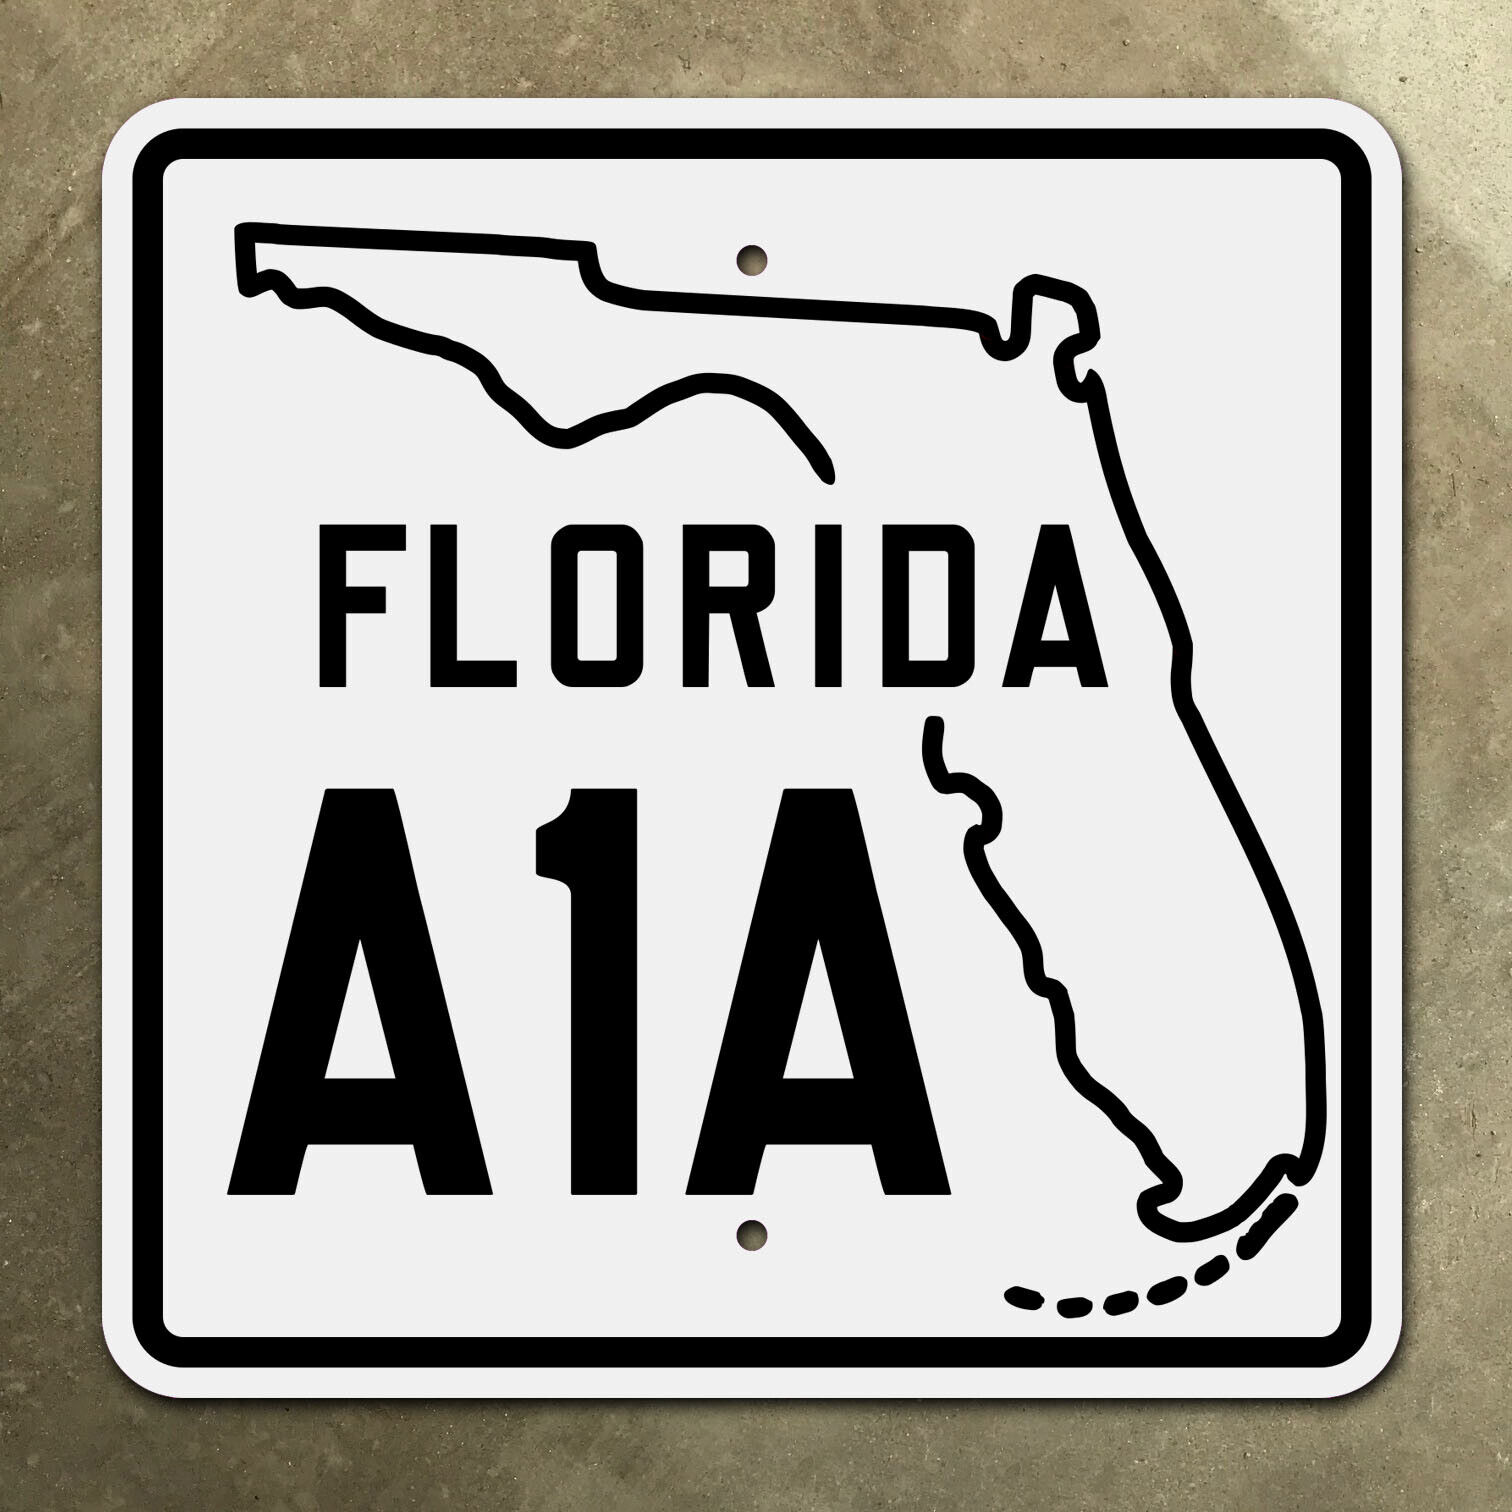 Florida state route A1A highway marker road sign Miami Beach Key West 16x16